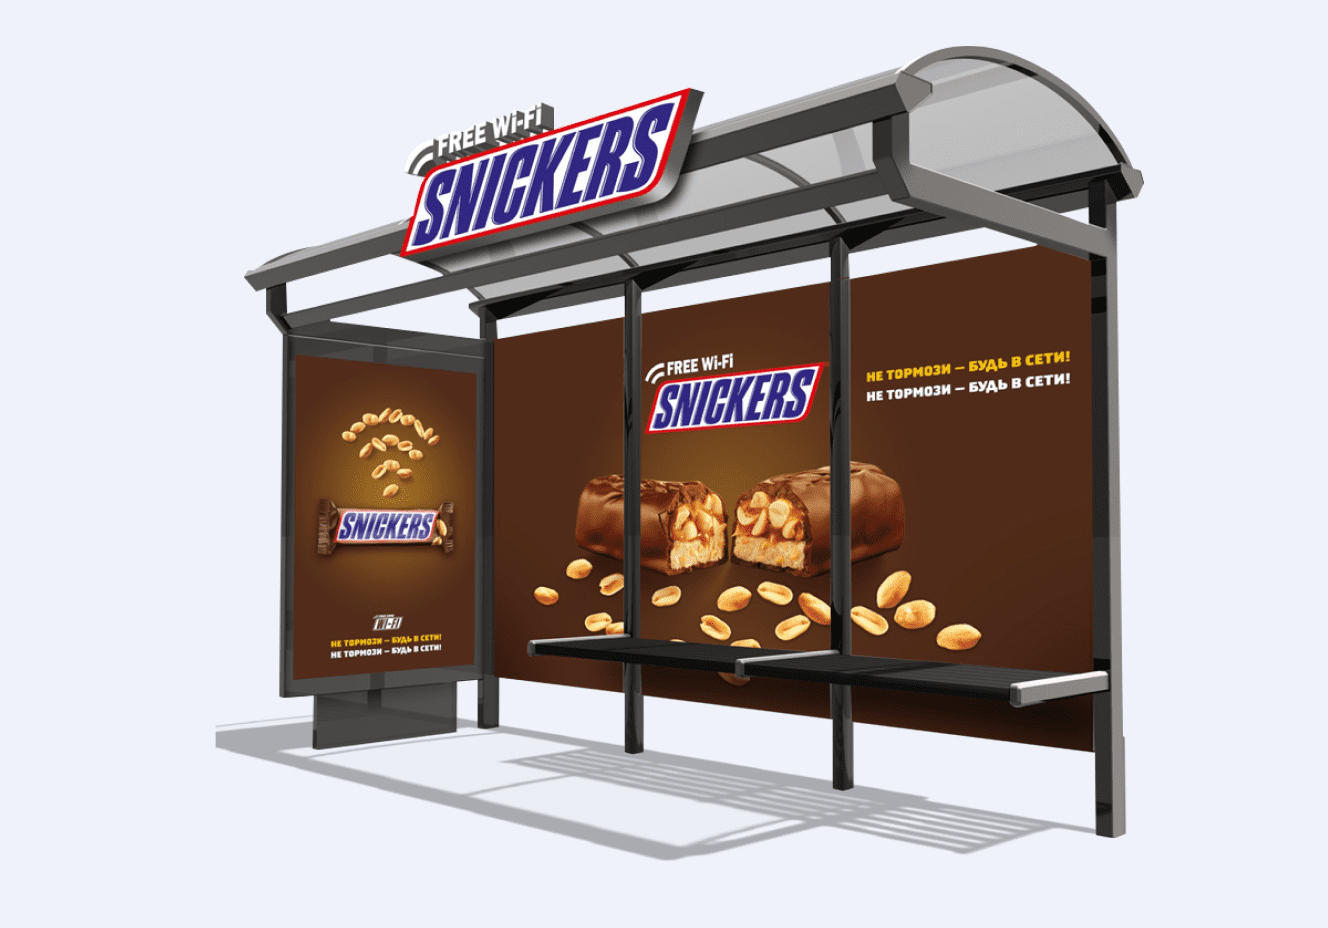 Snickers WI-FI